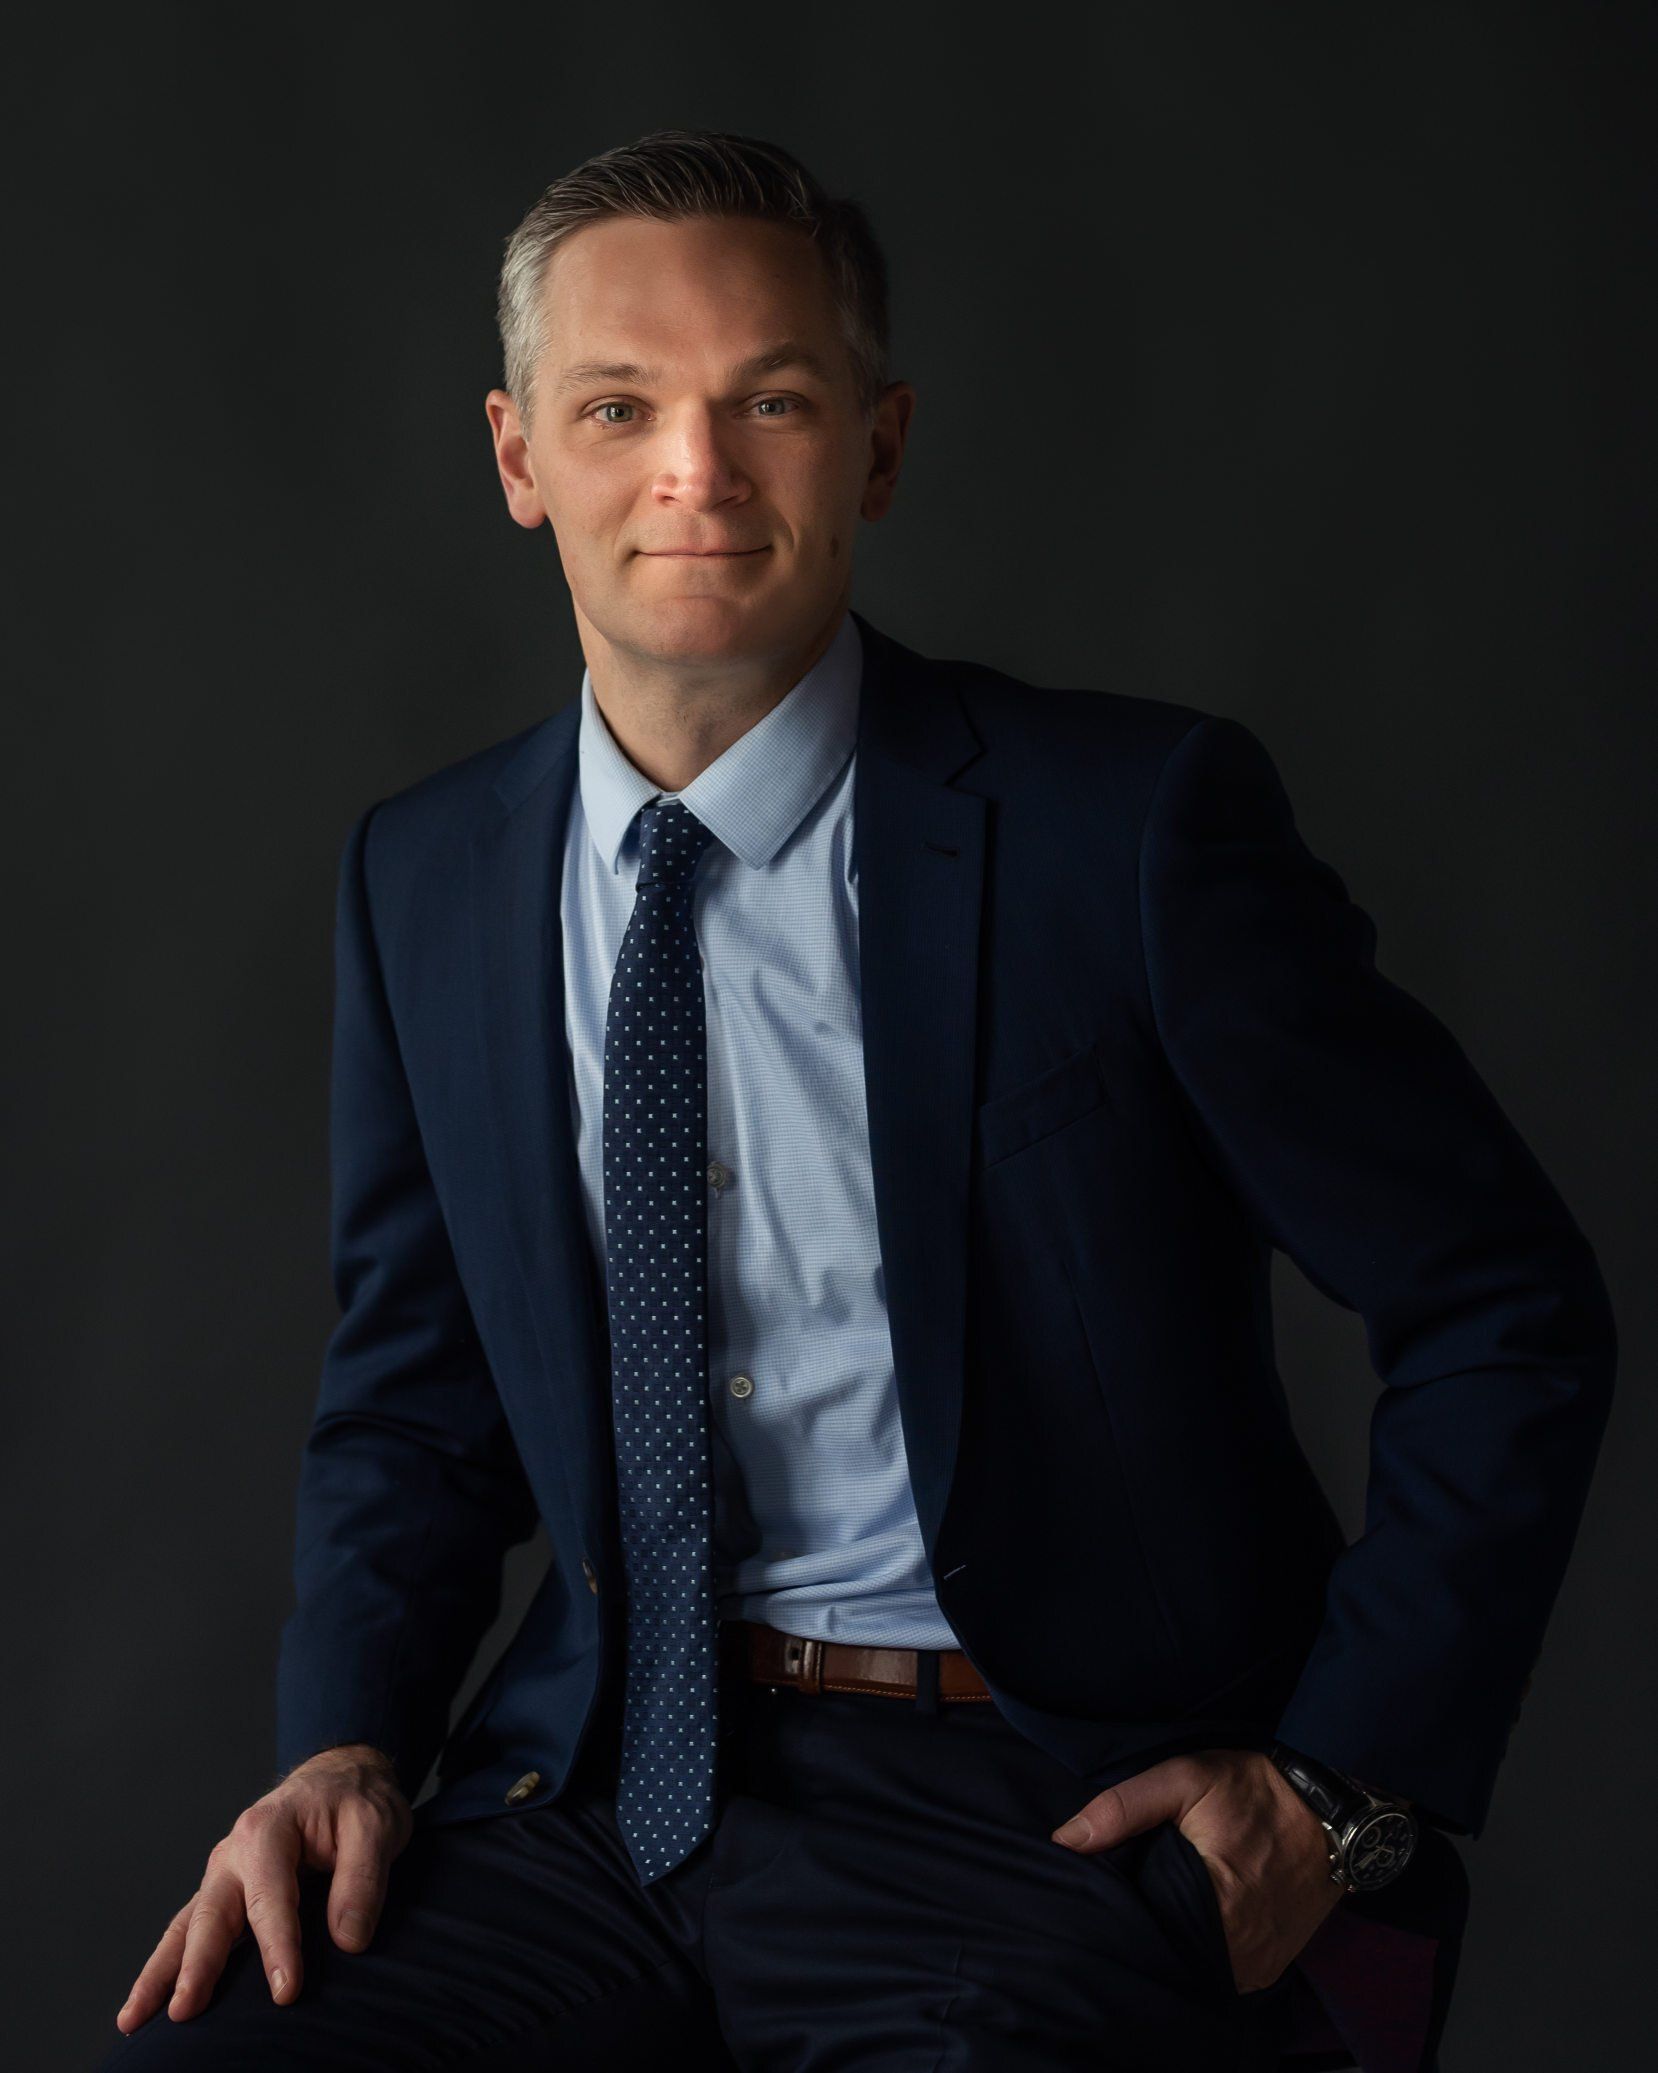 A business executive sitting and wearing a blue suit and tie in a professional headshot picture